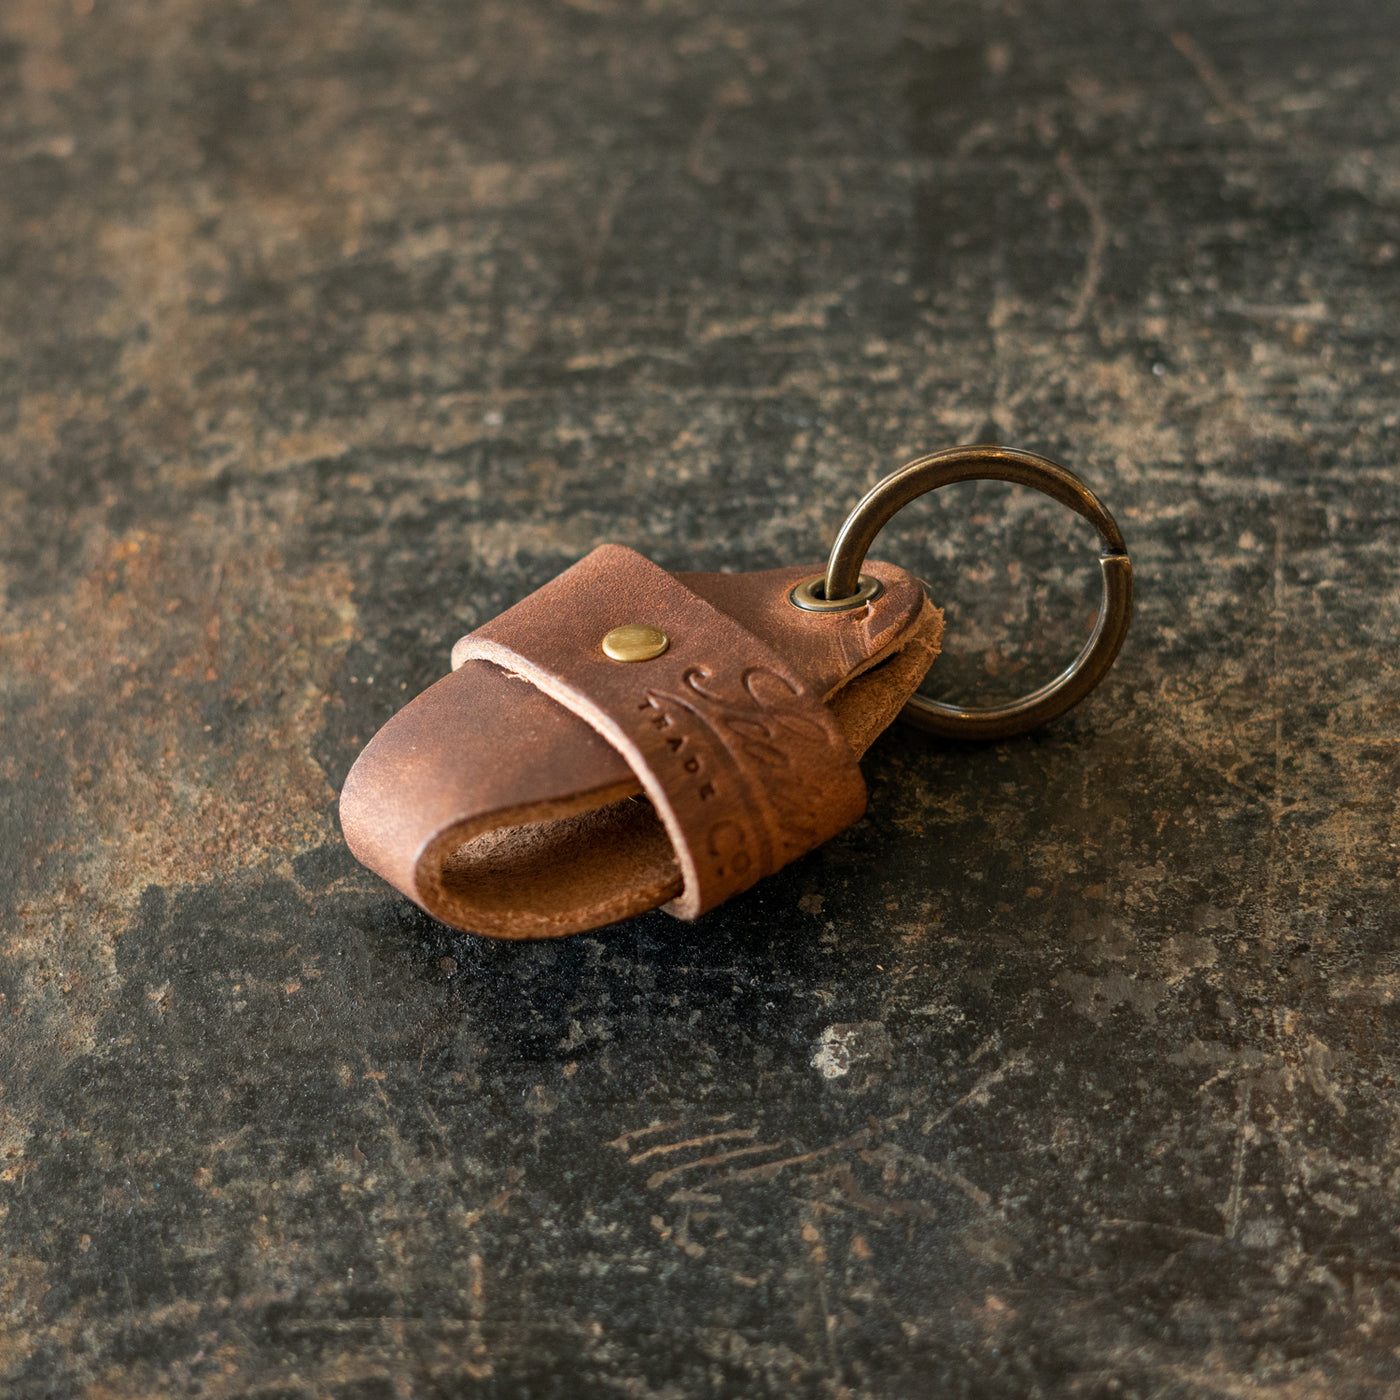 Scotsman Leather Key Collector